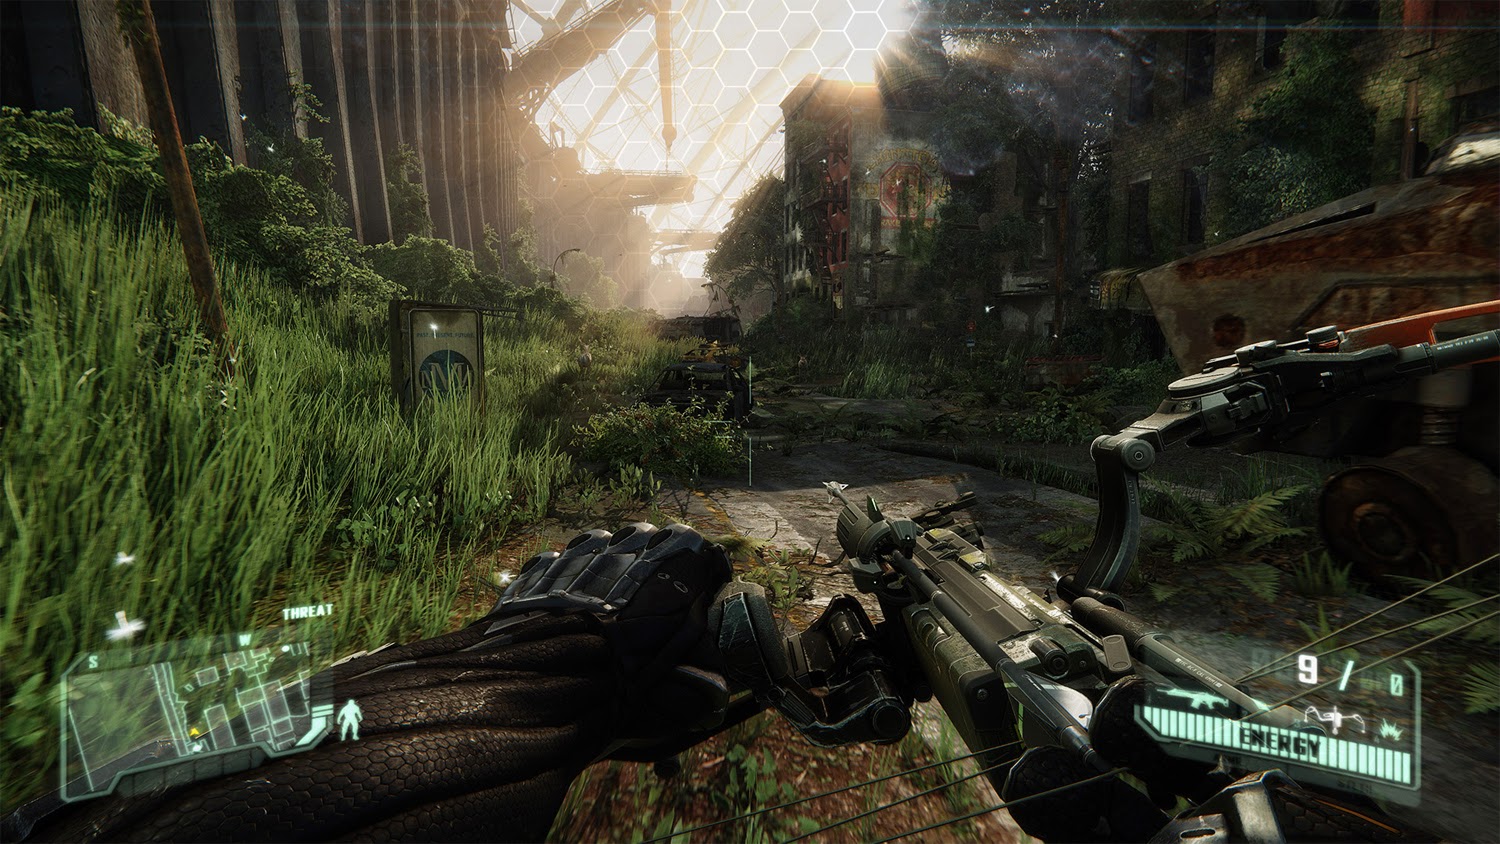 Download Game Crysis 3 Full Crack For Pc 100 Working Full Version